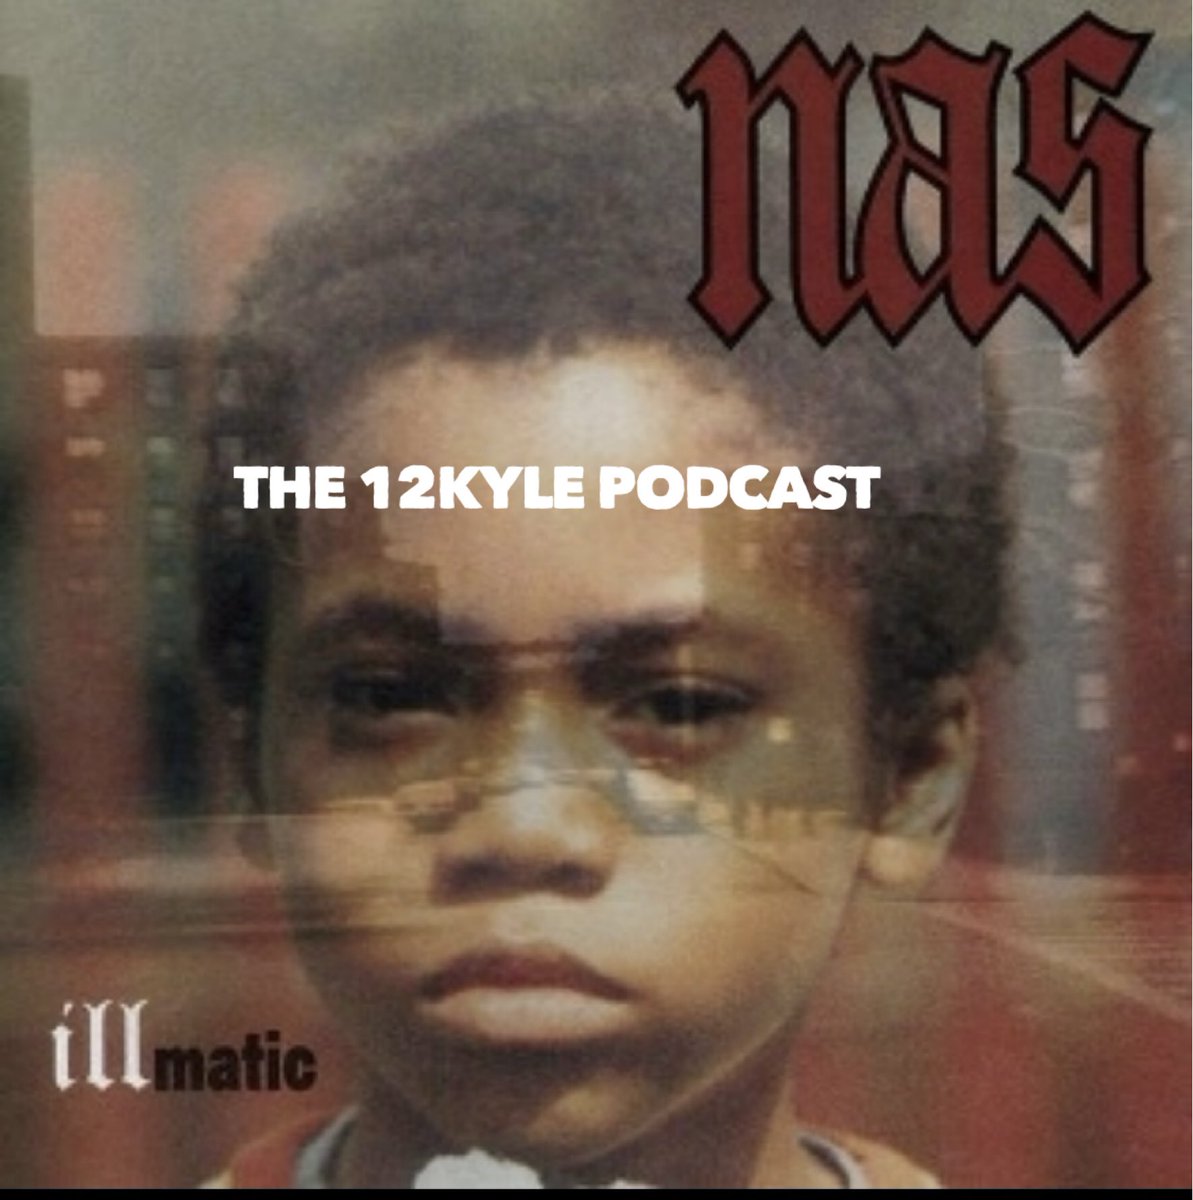 Illmatic - NaS 4-19-94 30 yrs 🔥🔥 🎤 🎤🎤🎤🎤 thoughts on 30 yrs of Illmatic… ⬇️ @12kylepodcast 🍏 podcasts.apple.com/us/podcast/the… Spotify open.spotify.com/episode/3j3Vf5… SoundCloud on.soundcloud.com/AbxM4FBg7W291n… YouTube youtu.be/56JUYWp9DHo?si…